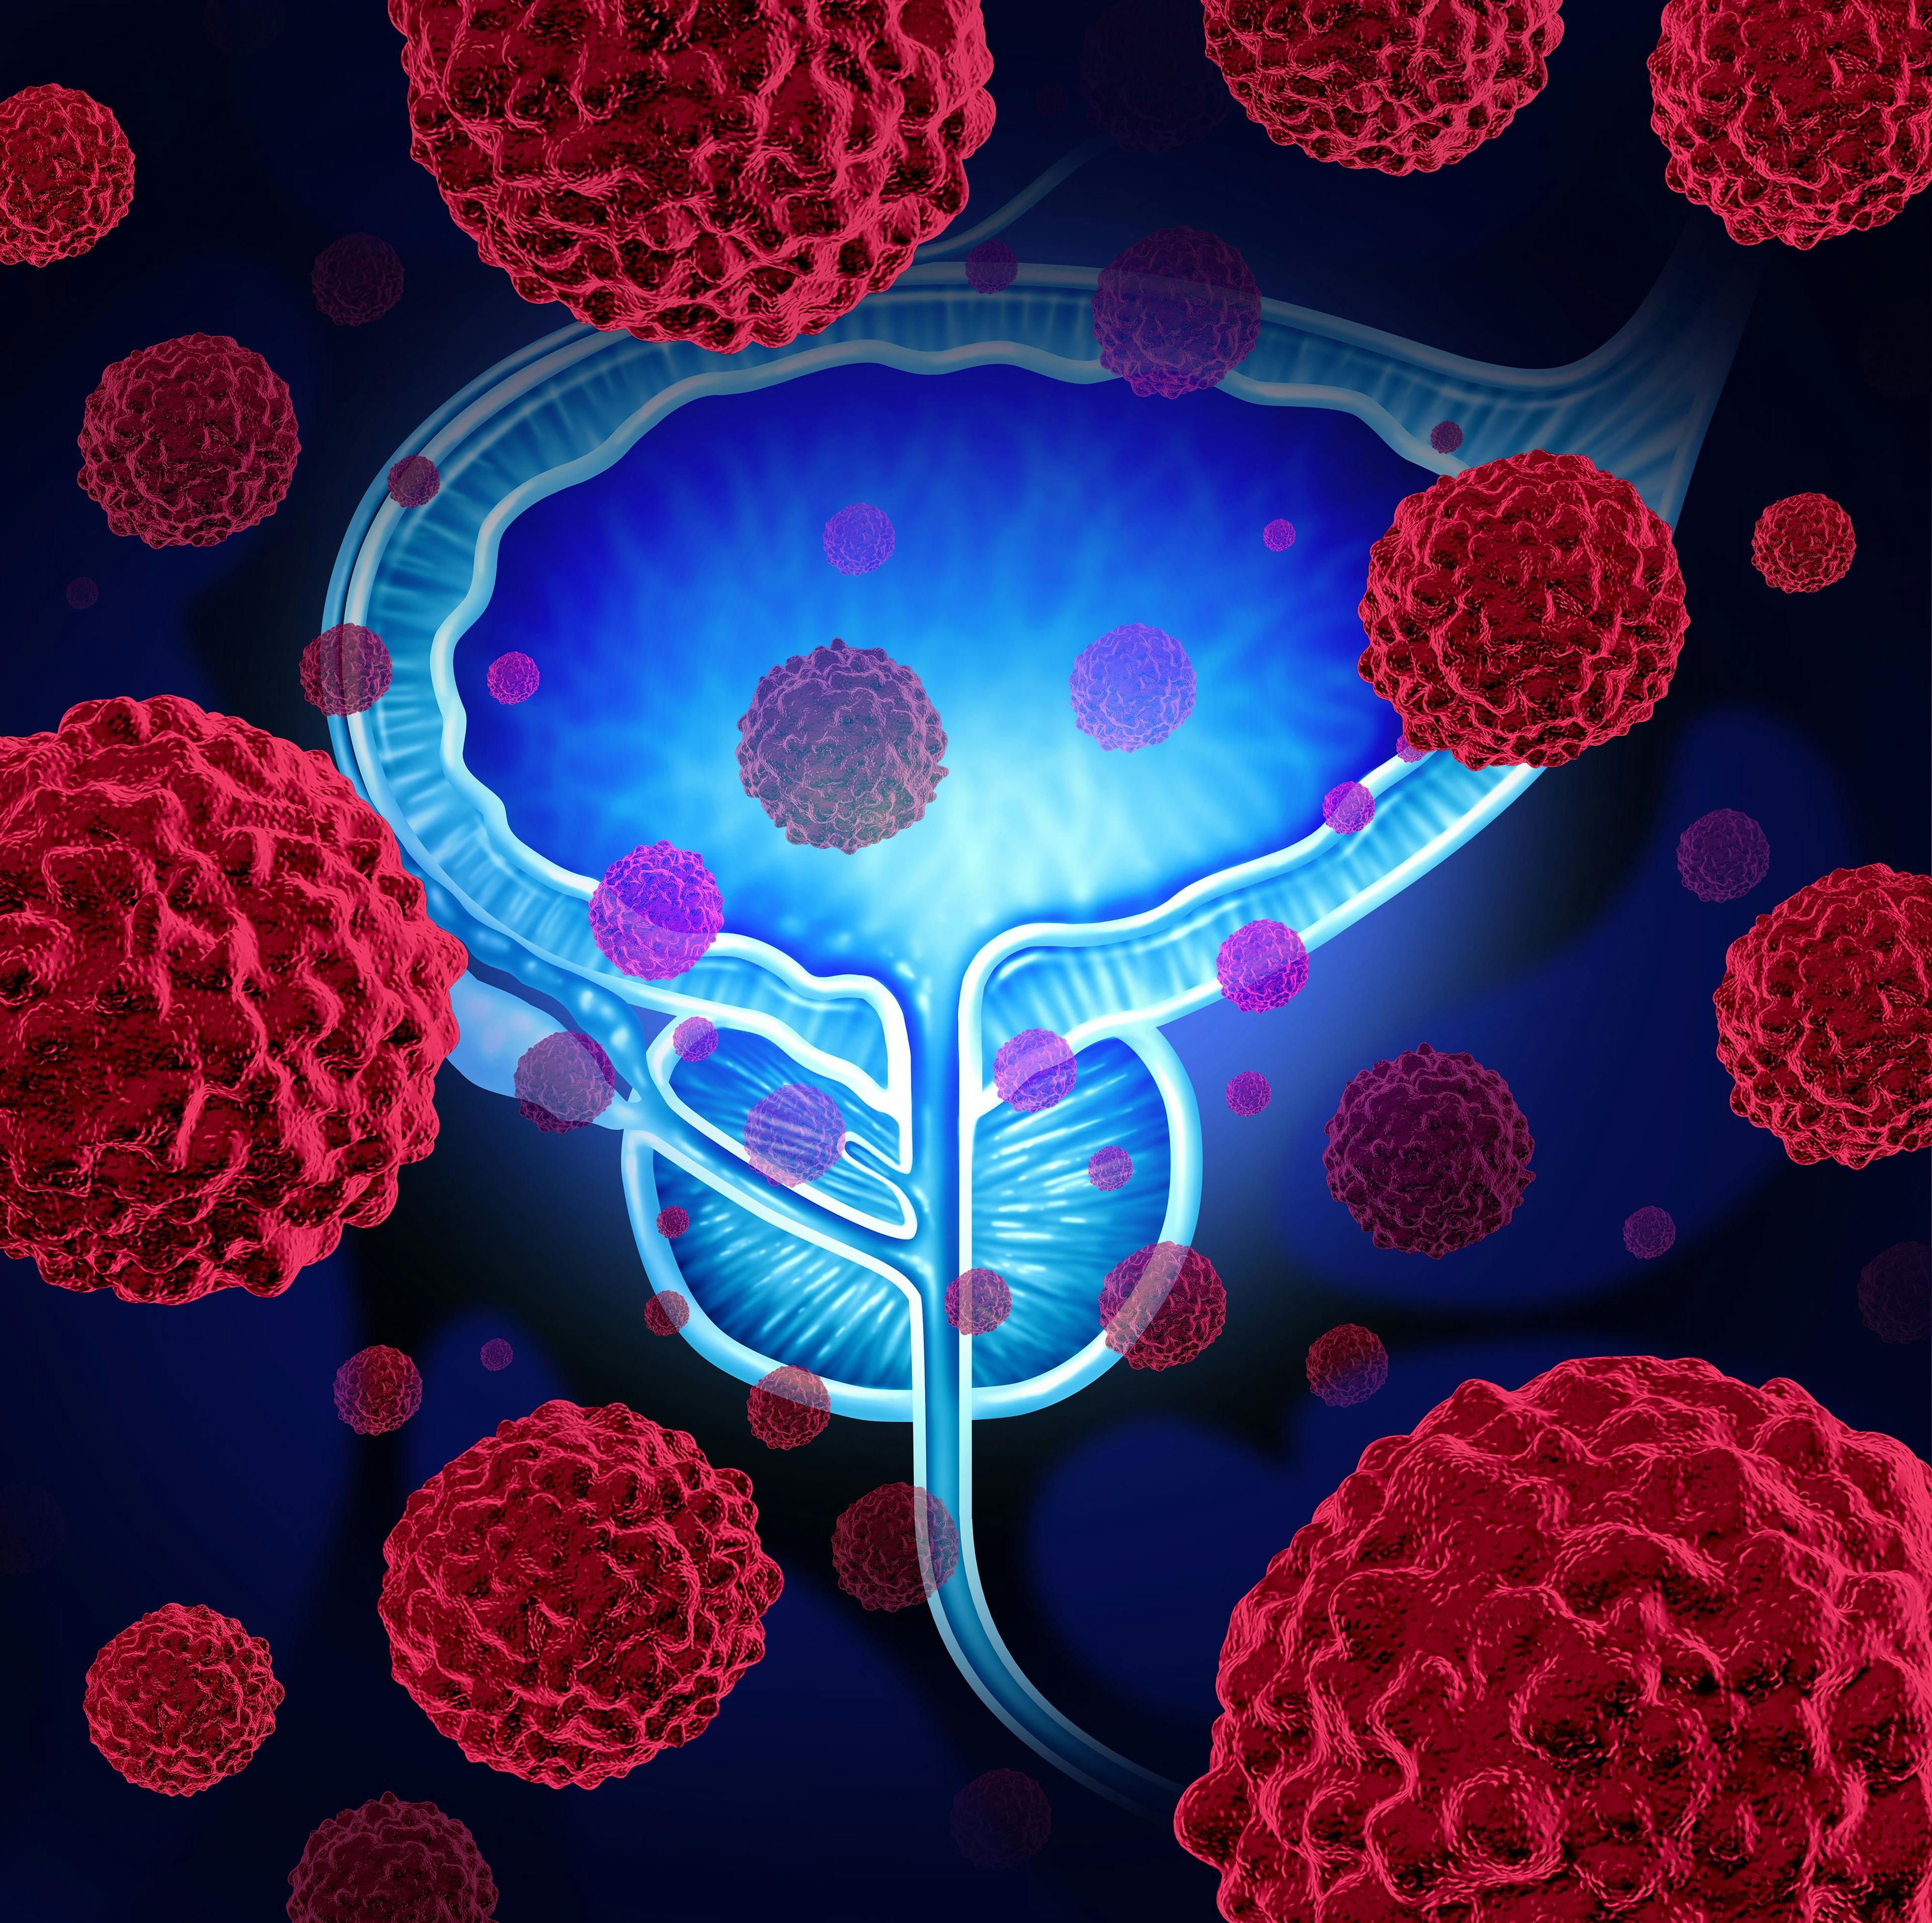 MRI Before Biopsy Led to Improved Benefit-Harm Profile, Cost-Effectiveness for Prostate Cancer